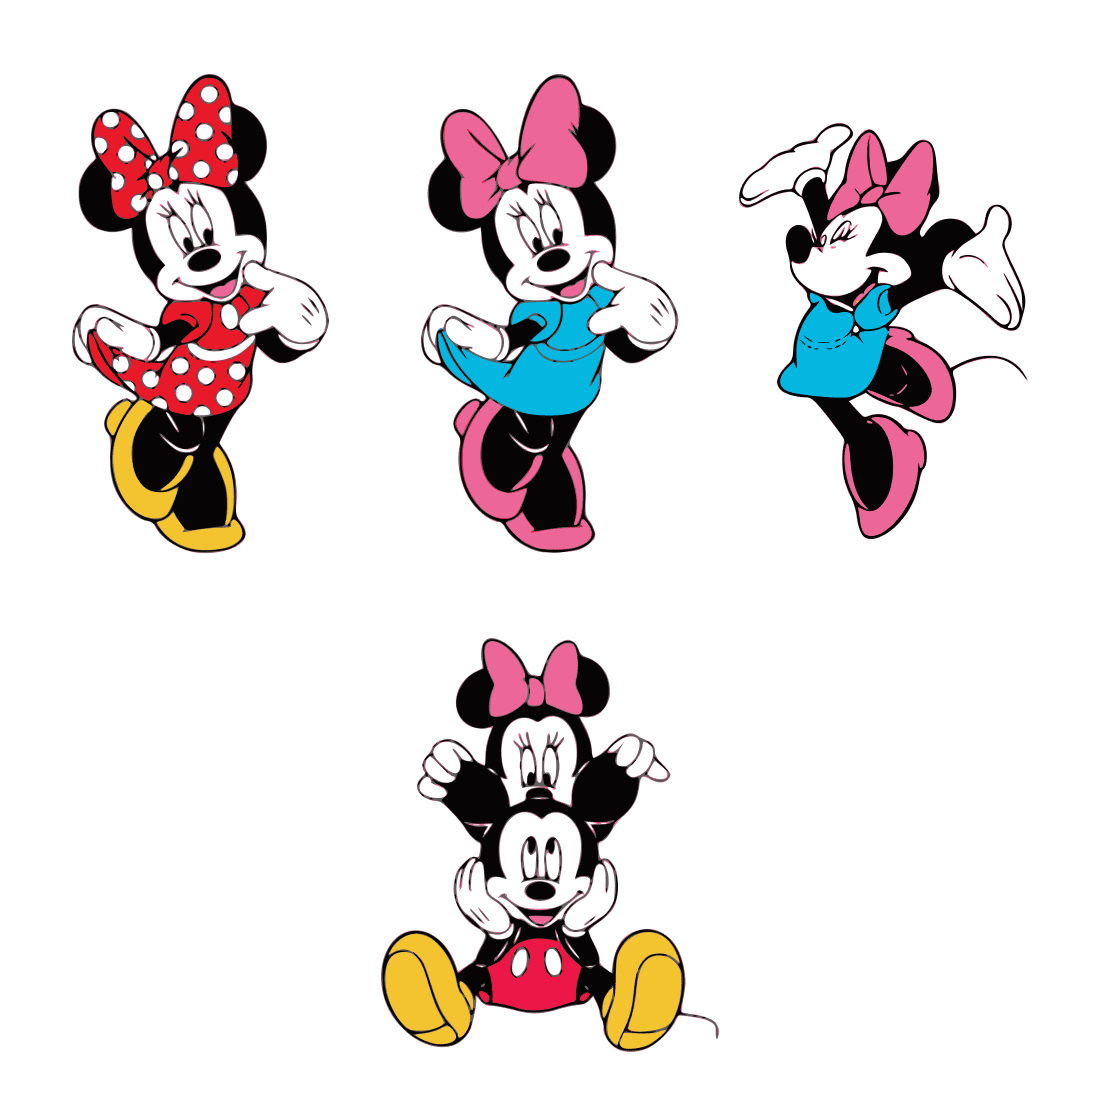 A collection of adorable Minnie Mouse images.